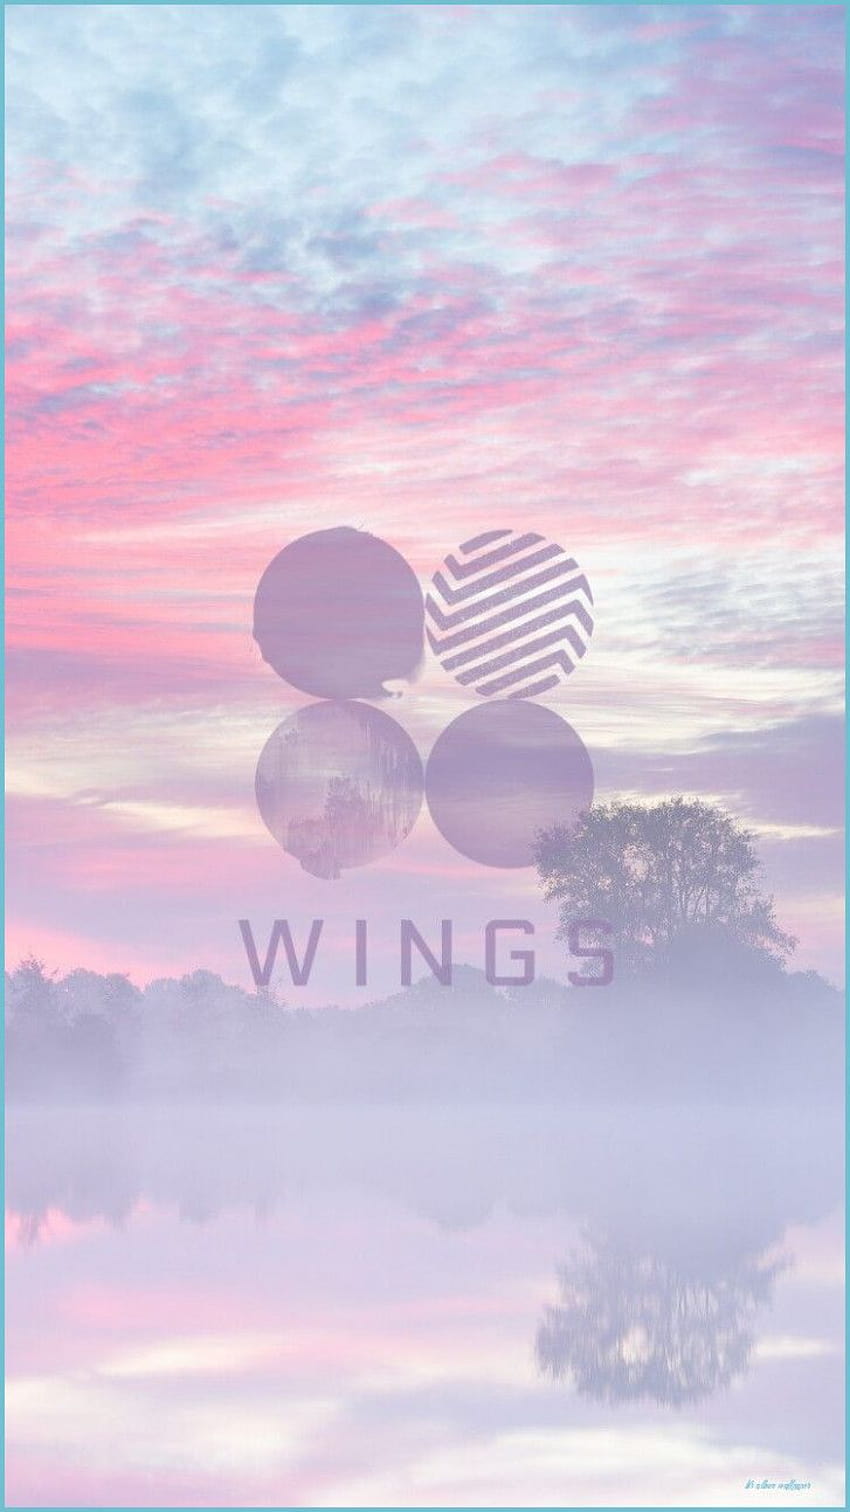 Well I am waiting for the next album Bts wings, bts albums HD phone wallpaper